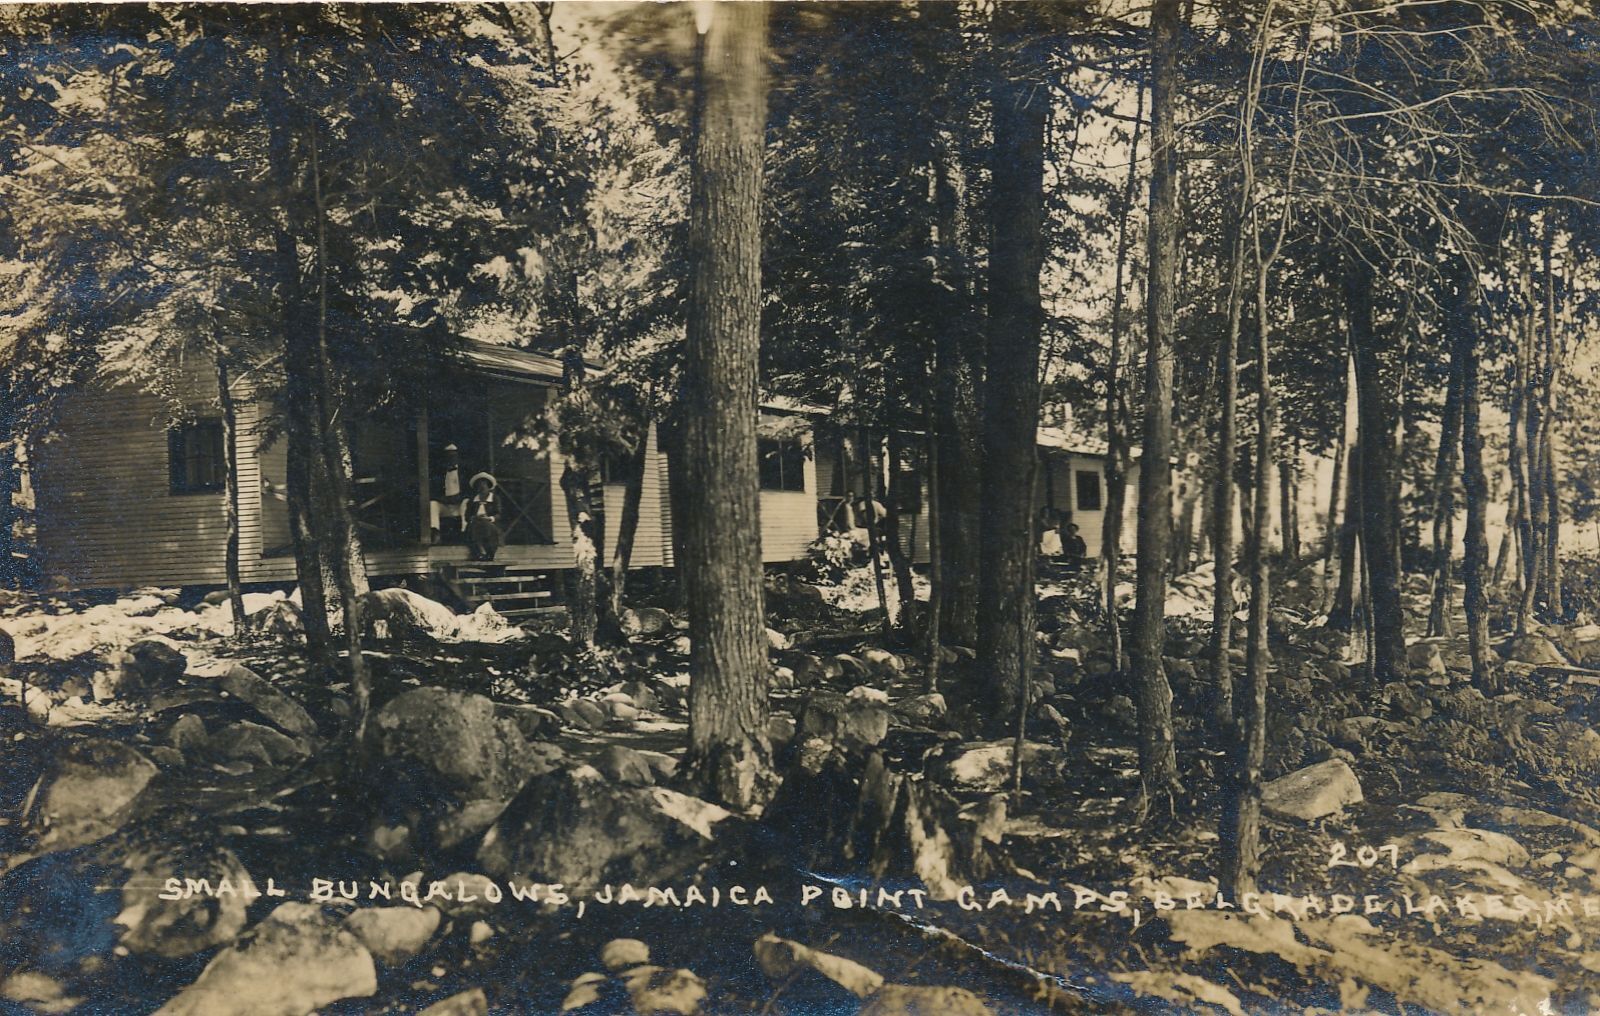 BELGRADE LAKES ME - Jamaica Point Camps Small Bungalows Real Photo Postcard rppc